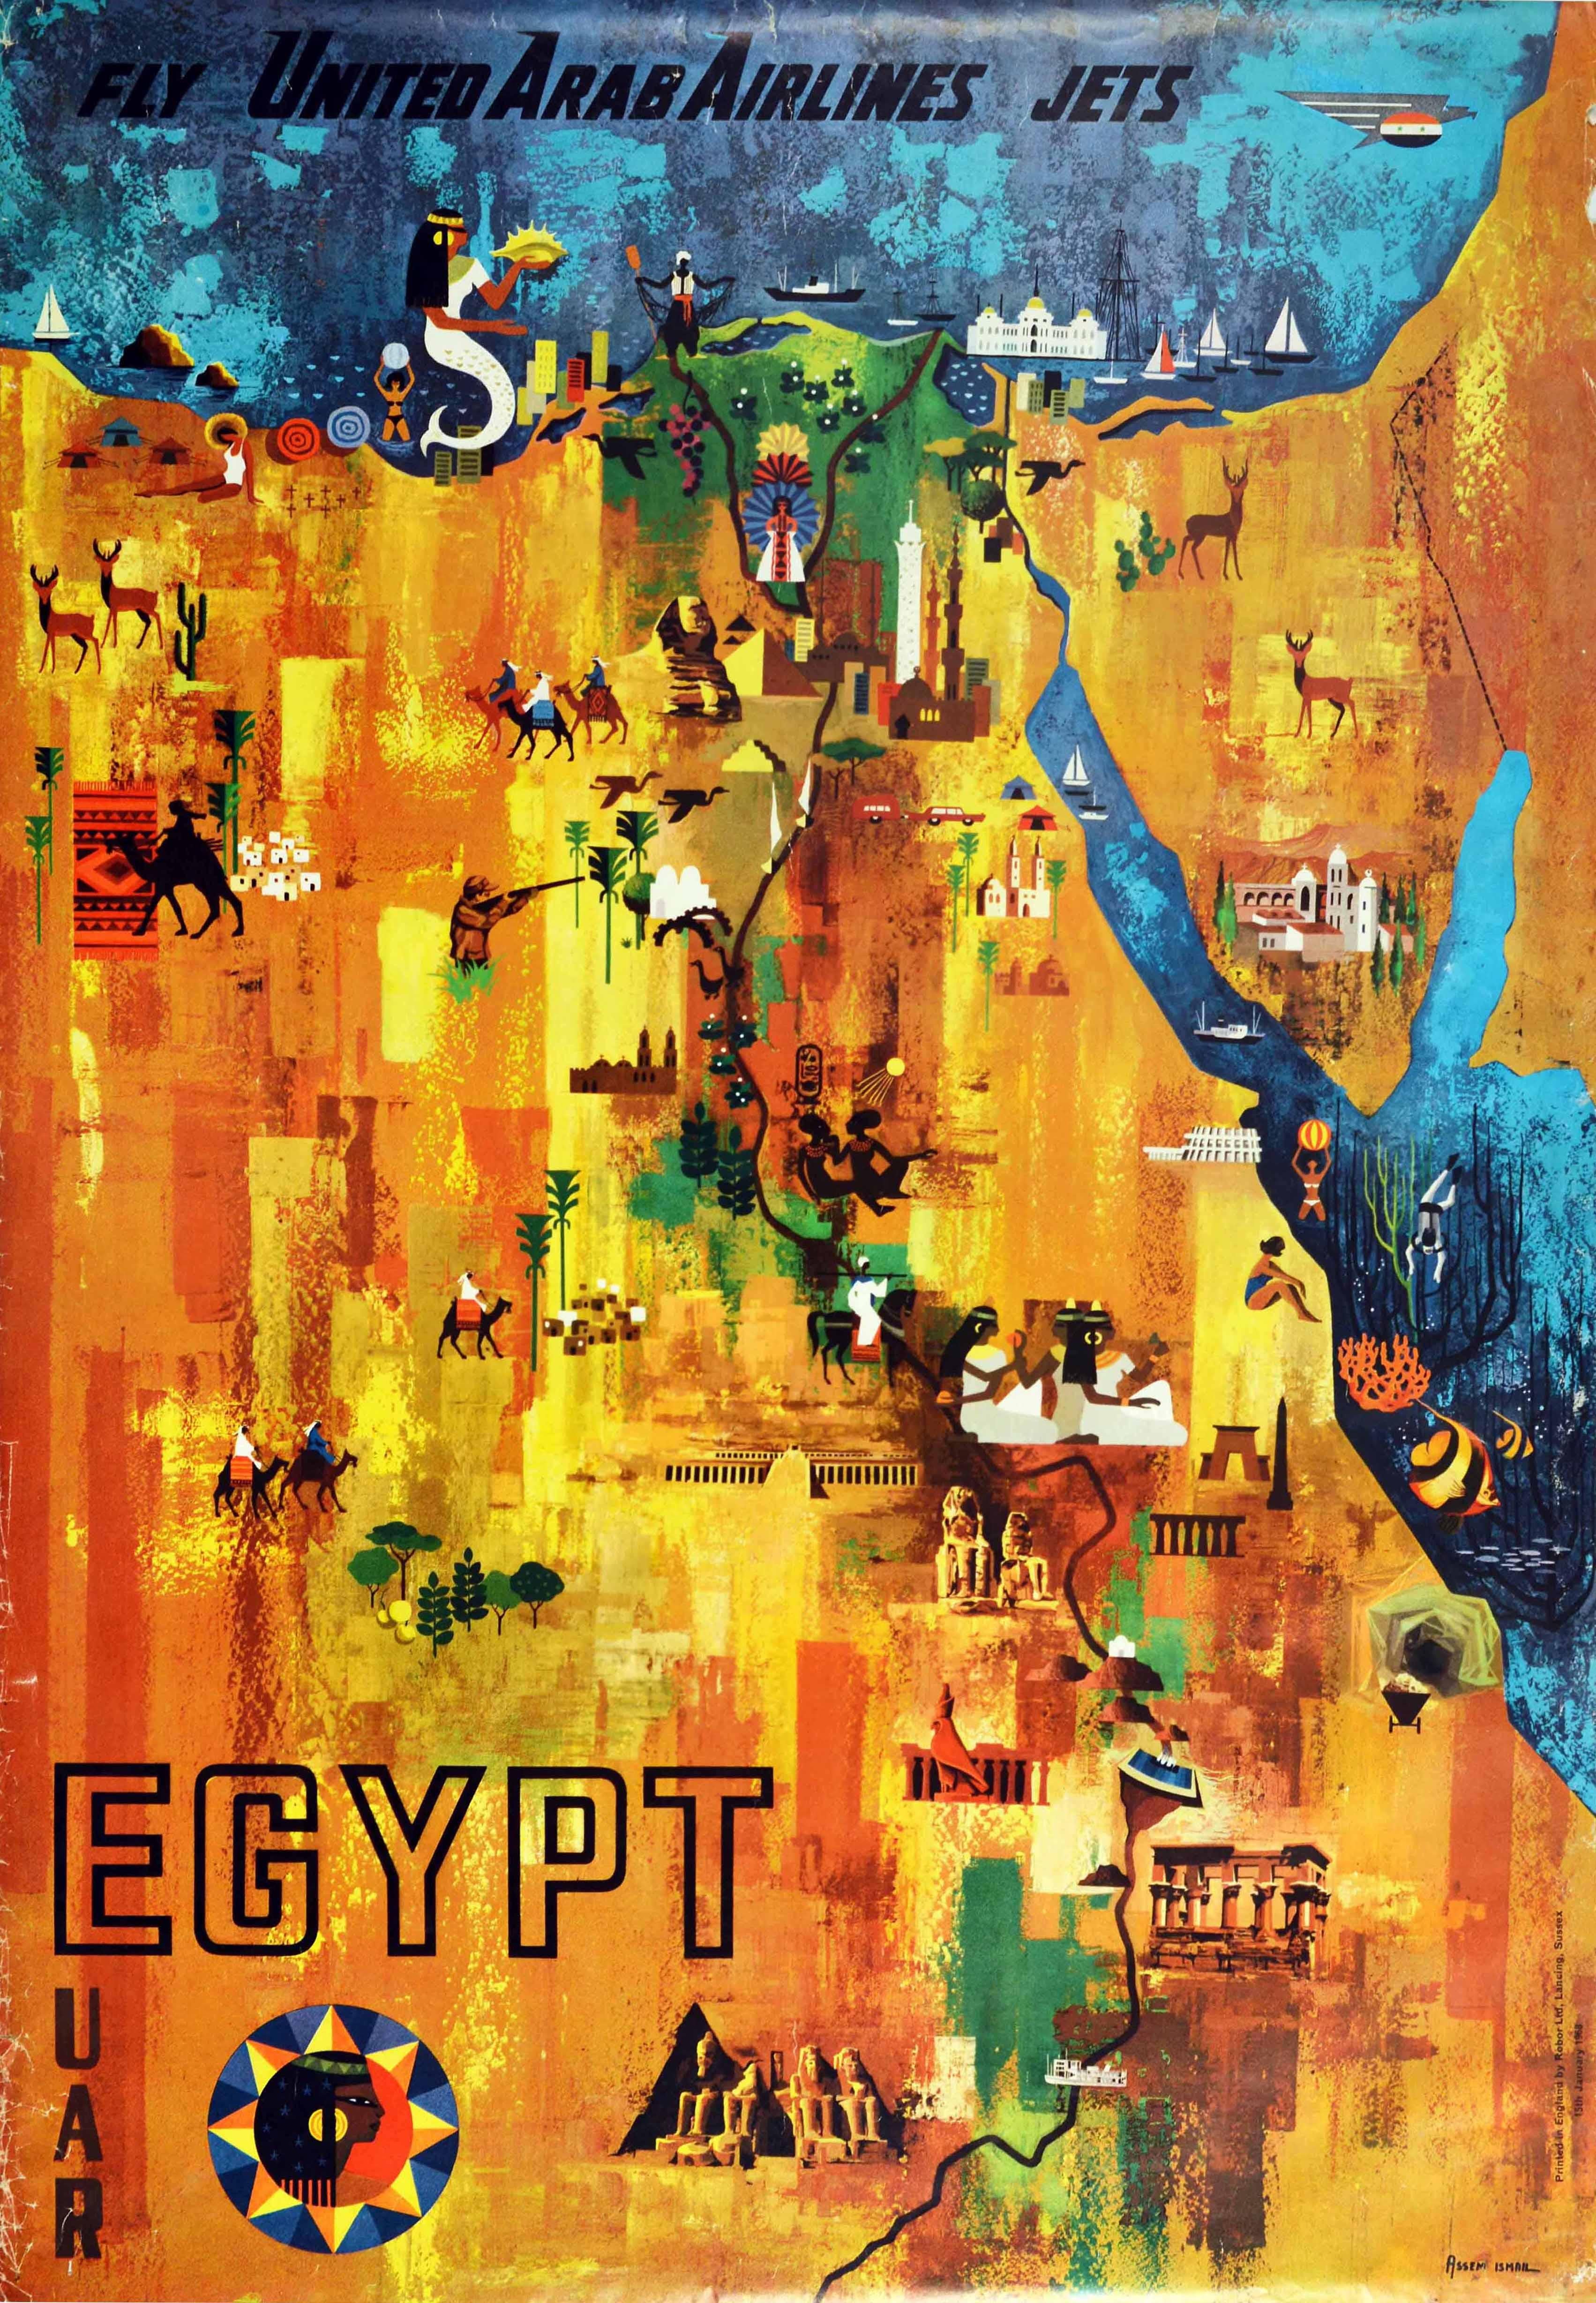 Original vintage travel poster promoting Egypt - Fly United Arab Airlines Jets Egypt UAR - featuring a colourful map with images of historic and new landmarks, sports and tourist attractions including people swimming in the sea and enjoying the